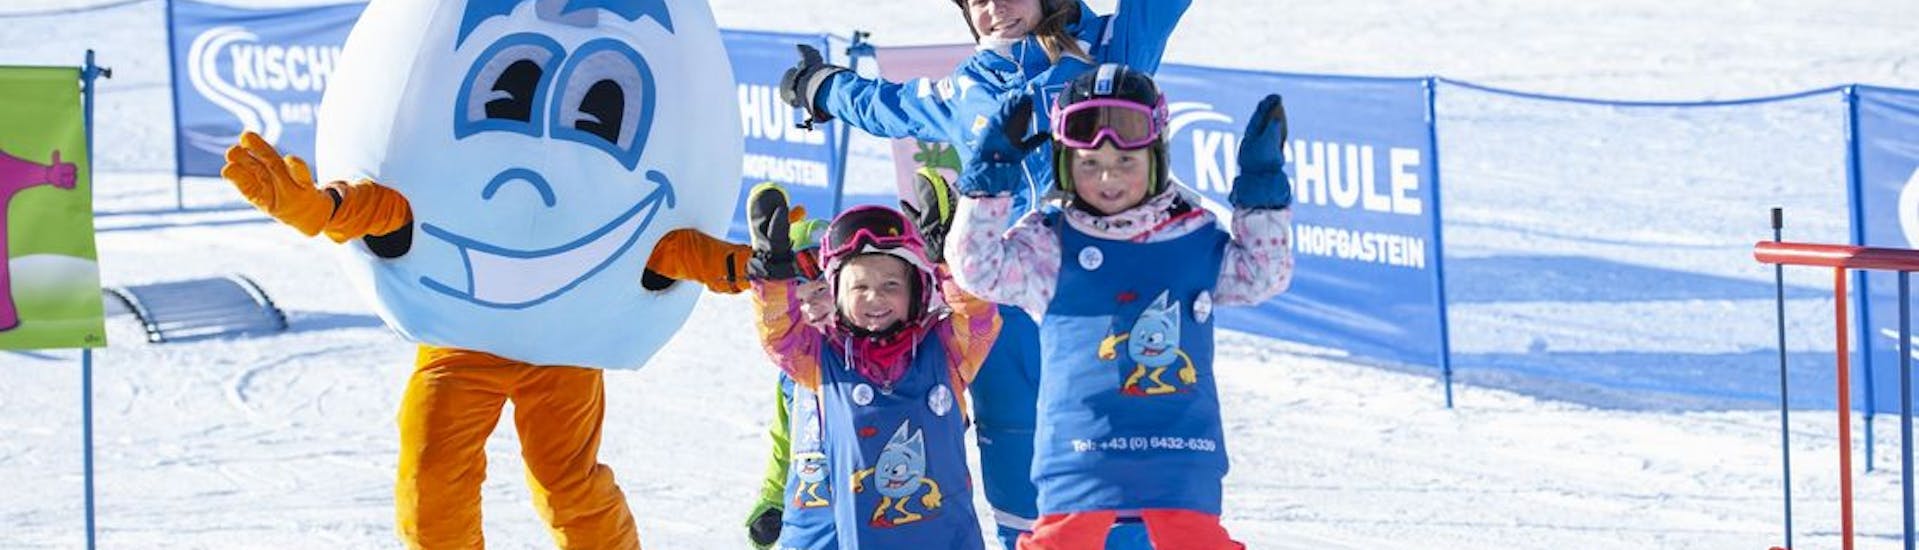 Kids having fun on the slopes with Gasti during their Kids Ski Lessons (6-11 y.) for Advanced with Skischule Bad Hofgastein.